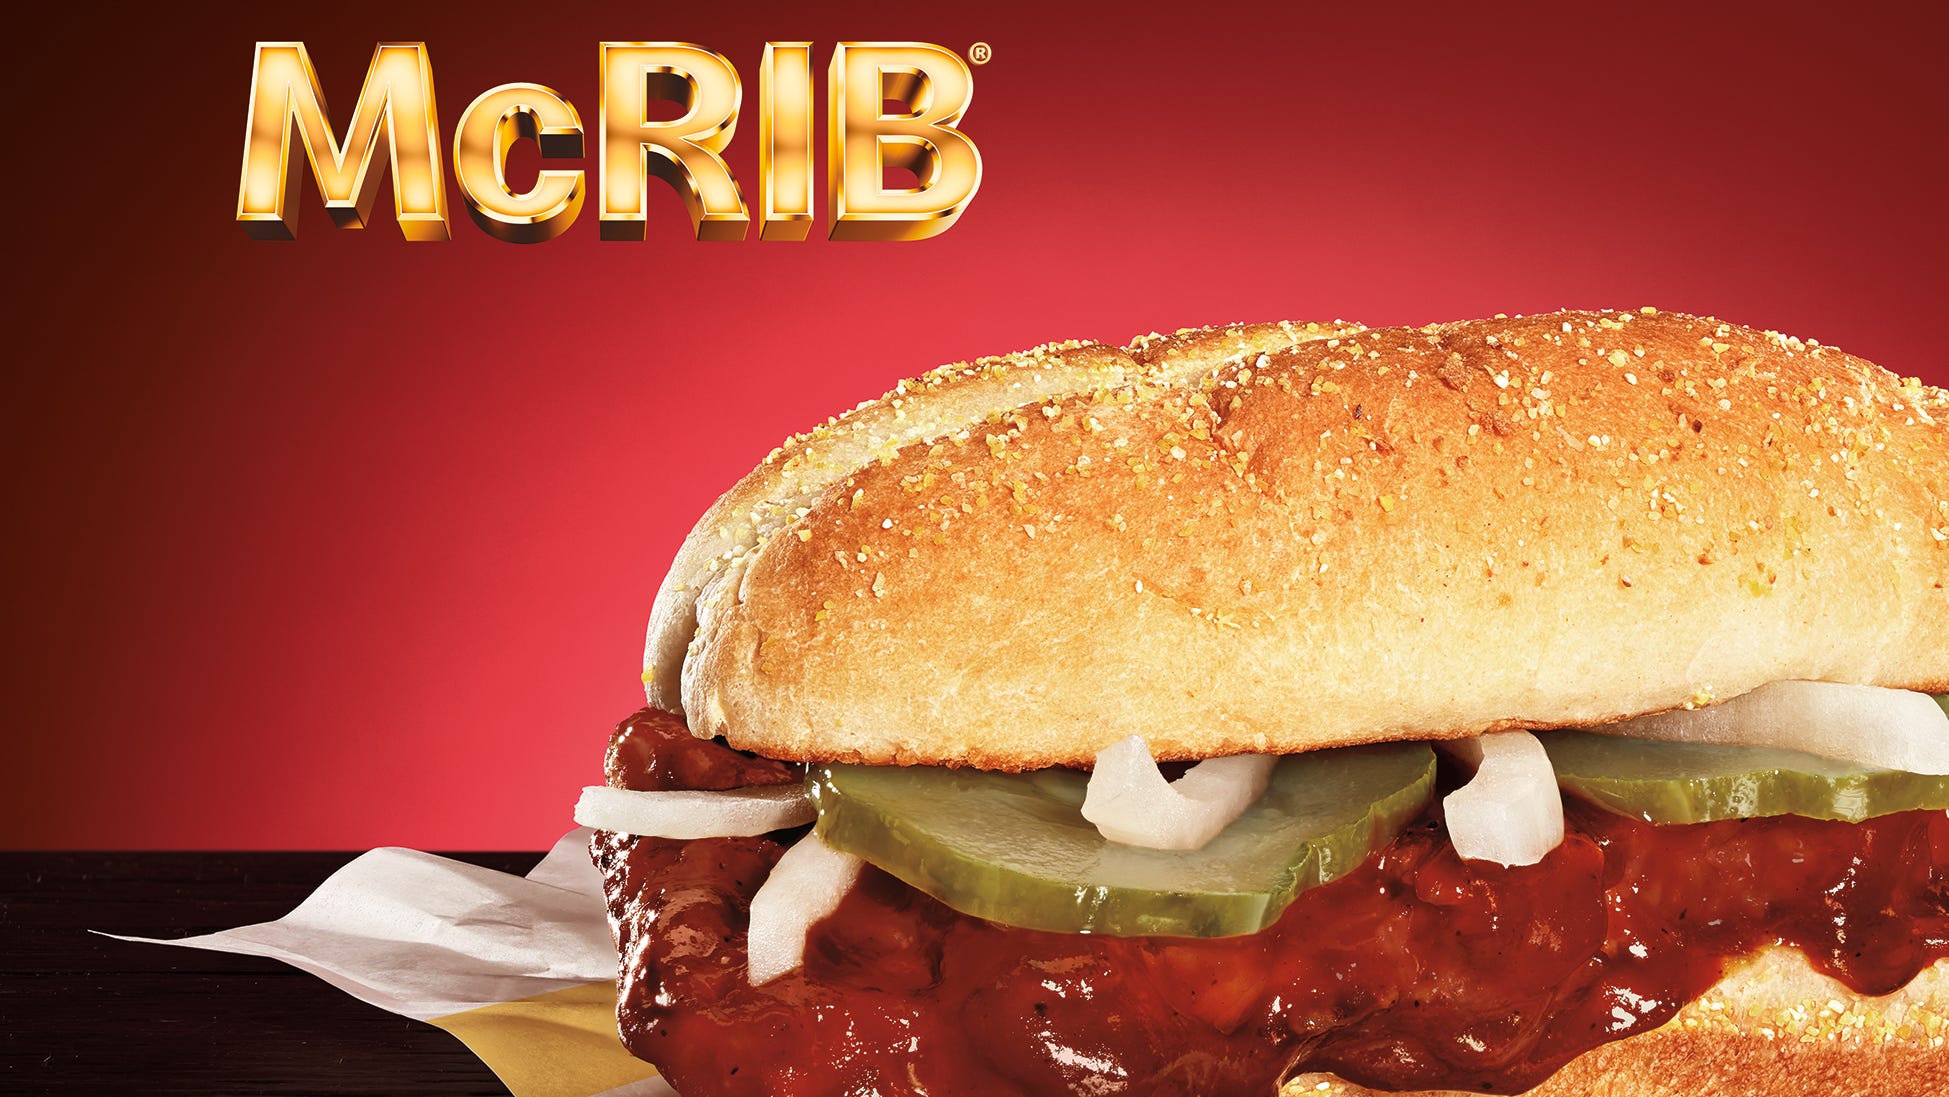 McDonald's McRib sandwich to begin another 'farewell tour'